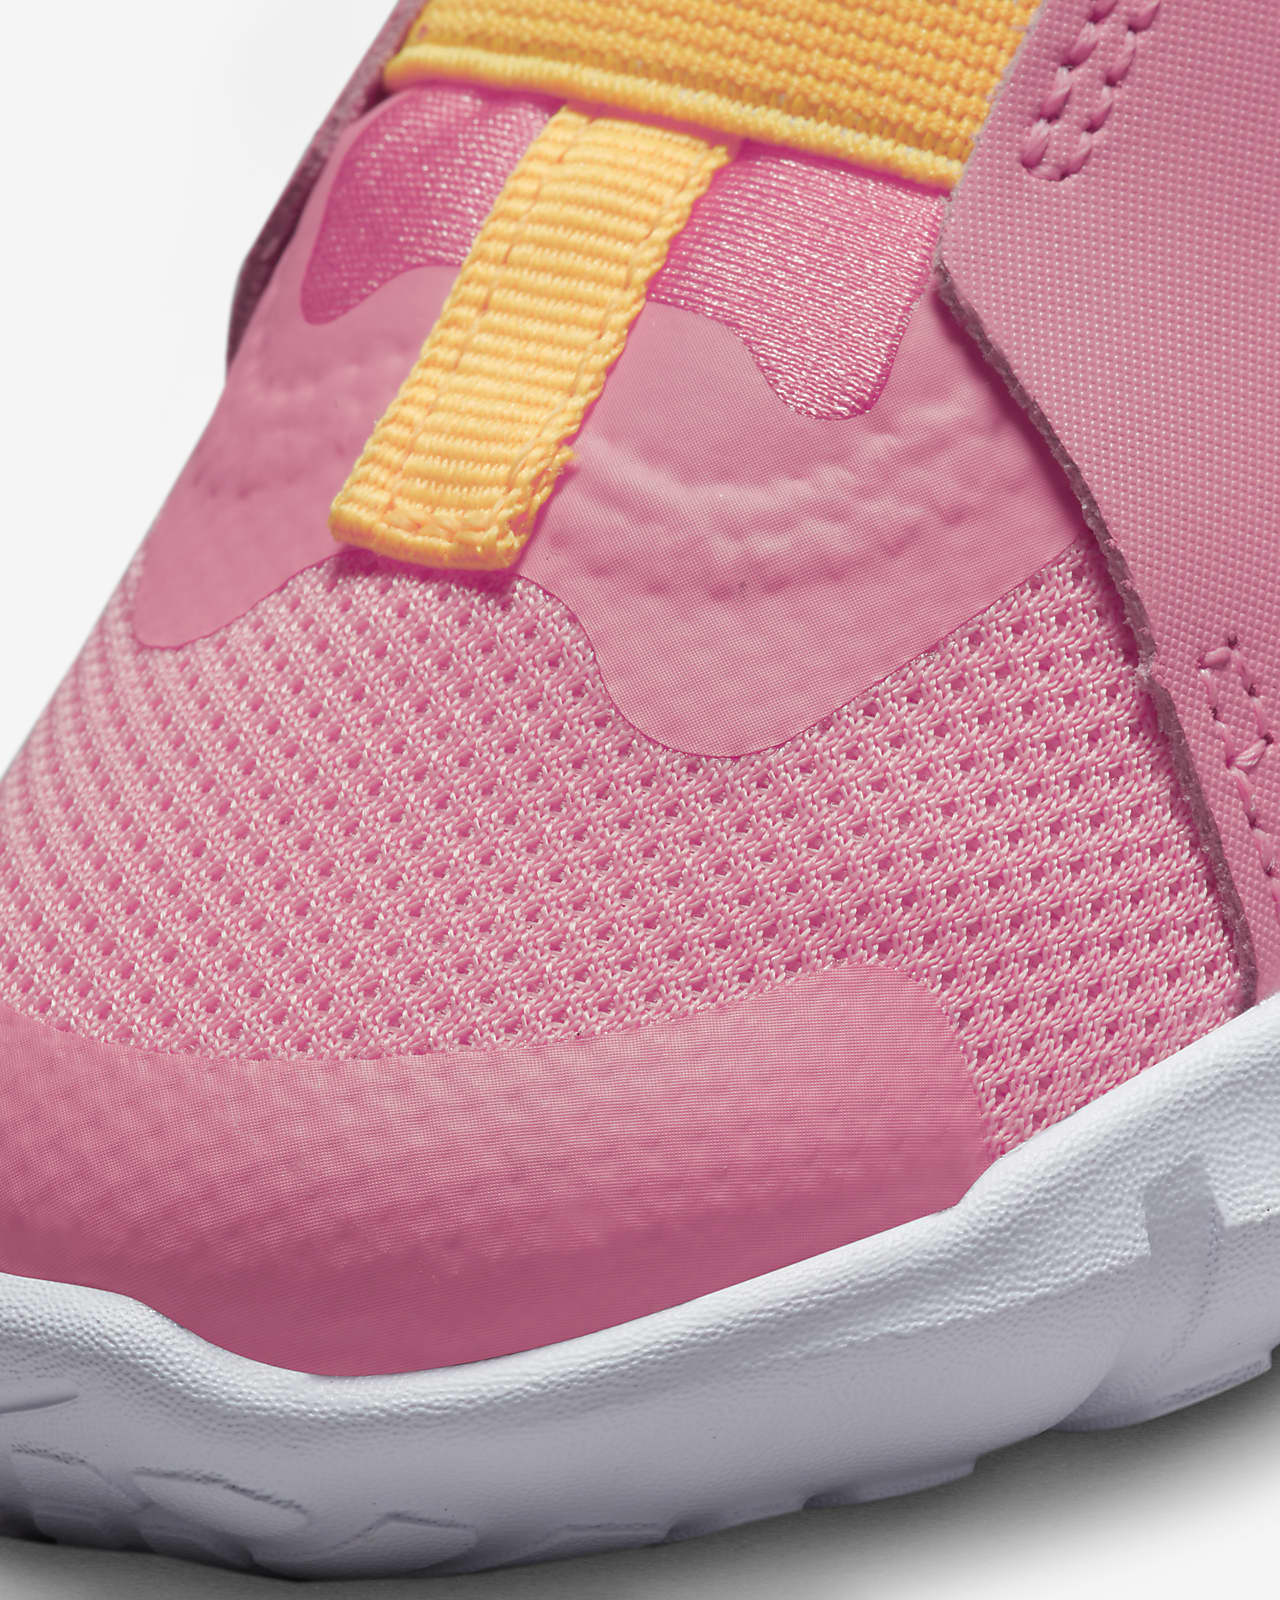 Nike Flex 2 Baby/Toddler Shoes.